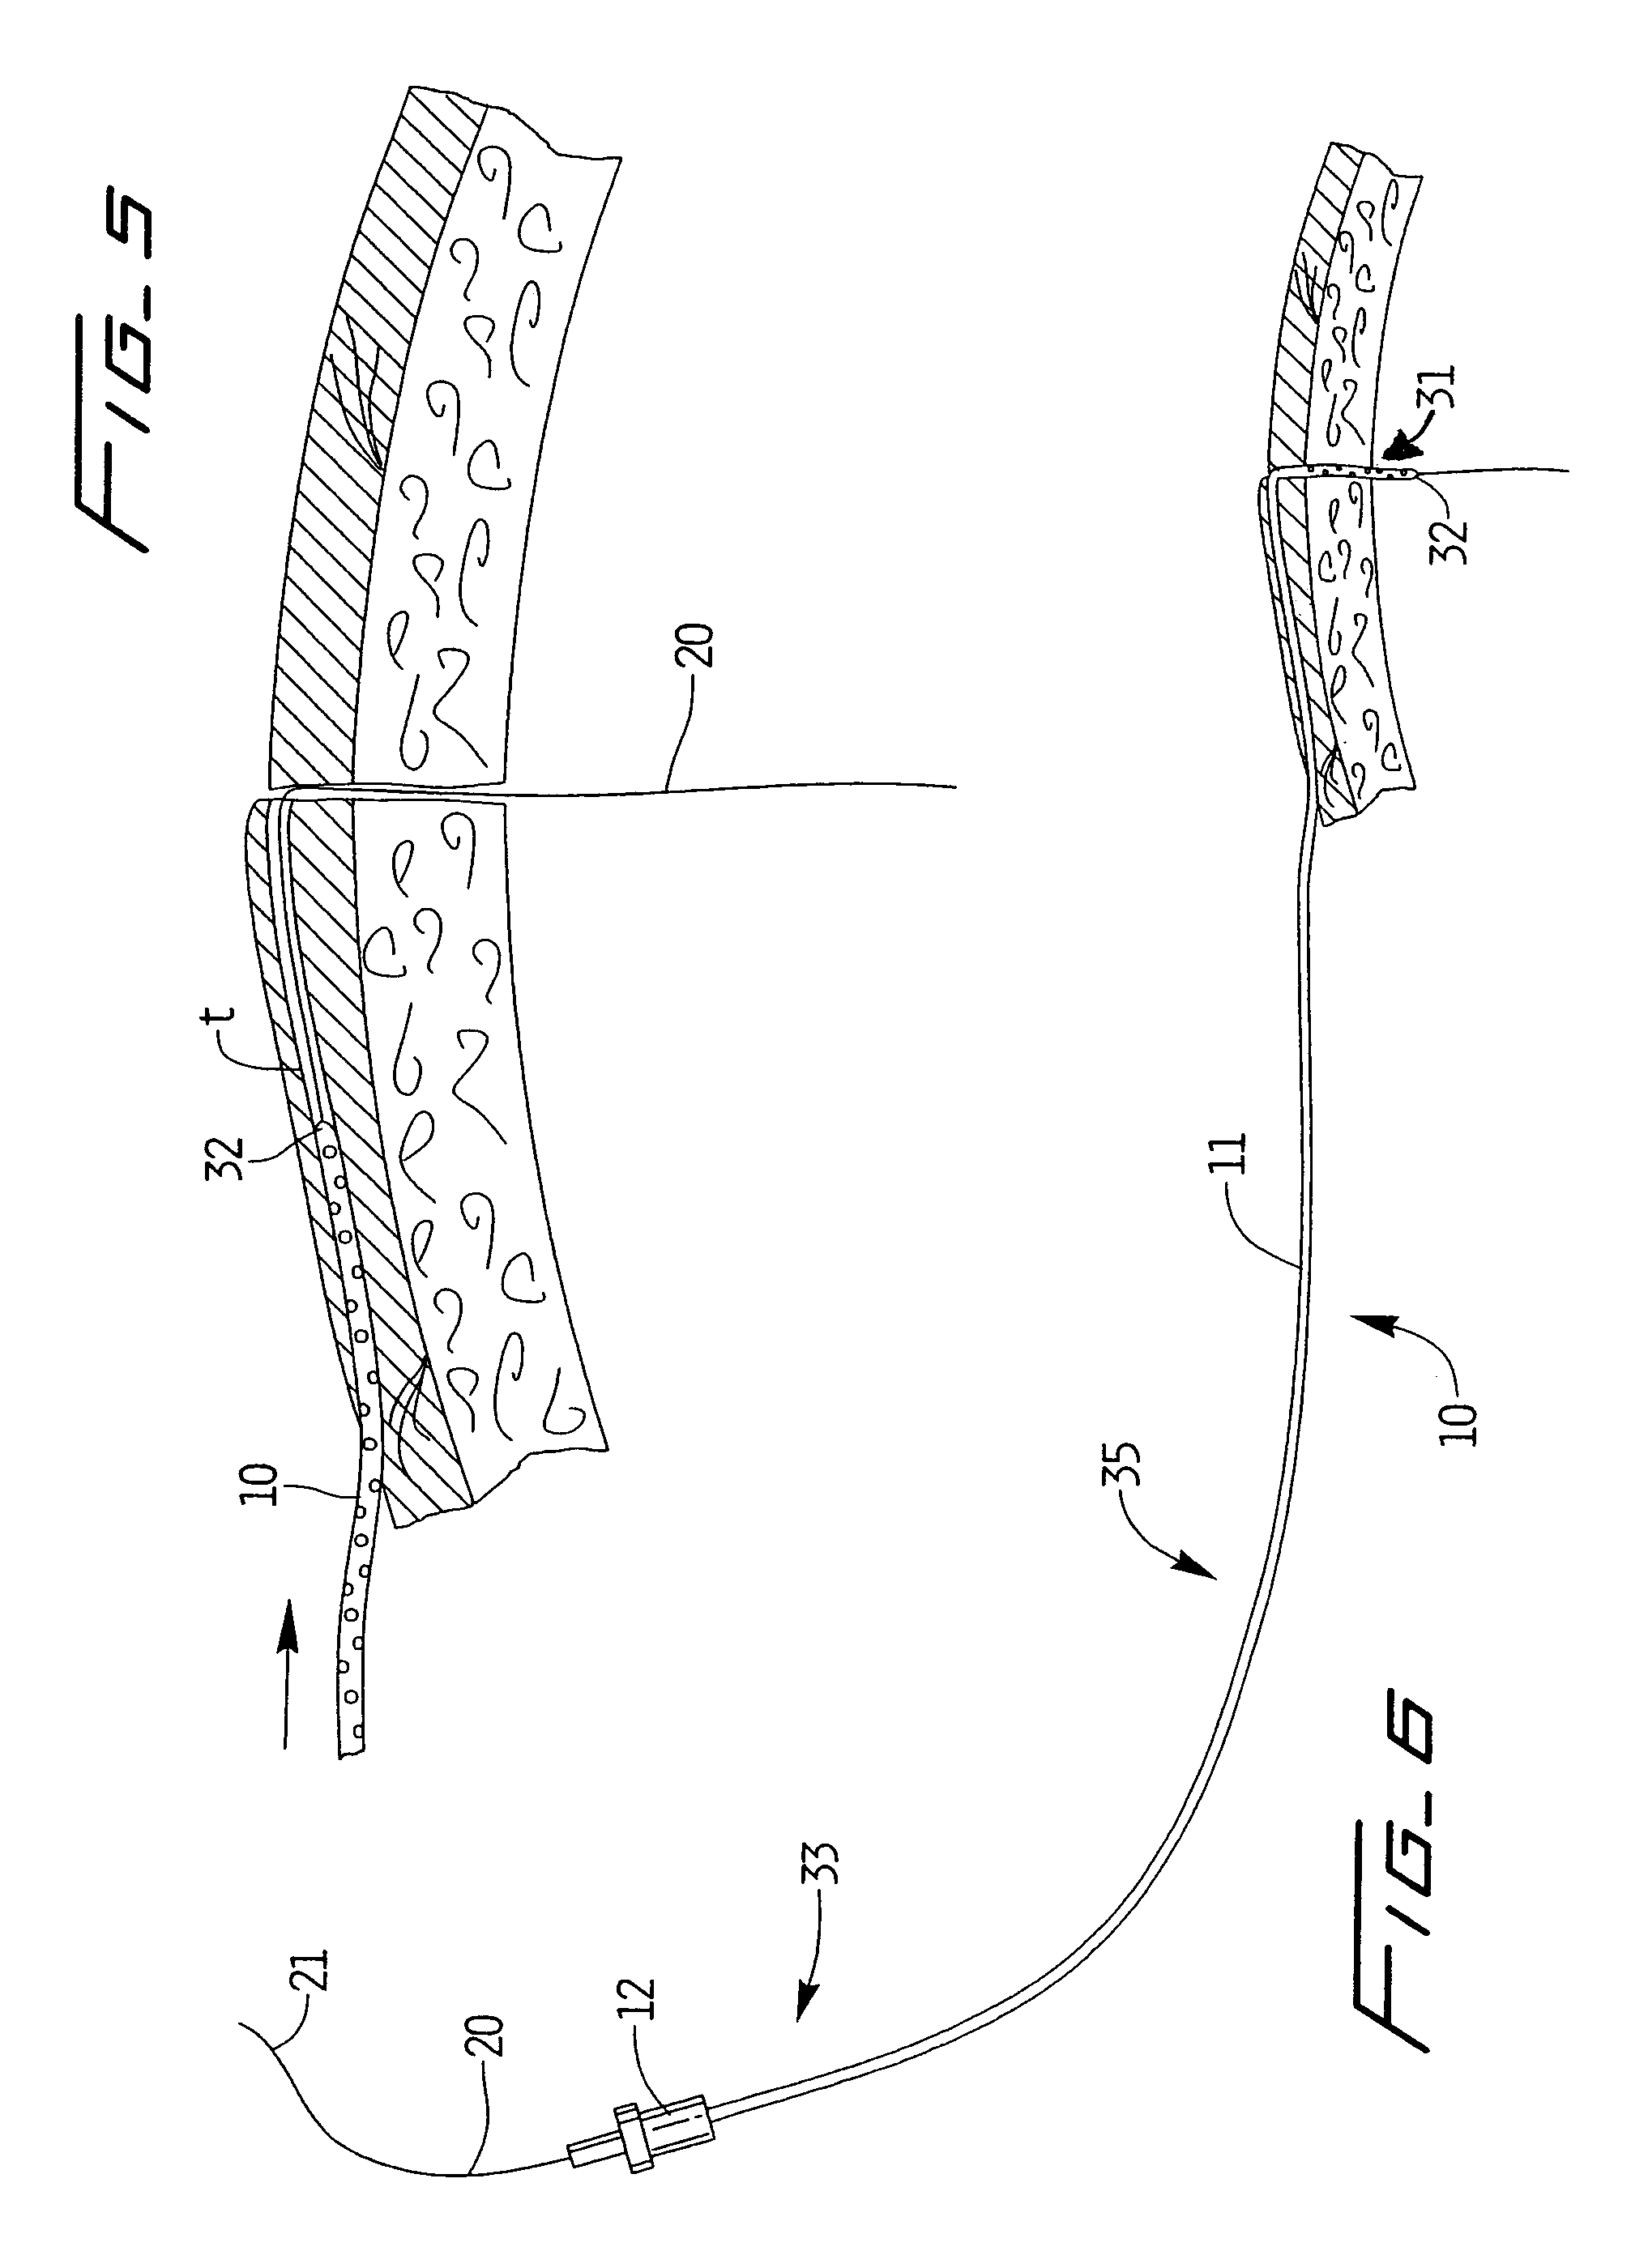 Peritoneal dialysis catheter and insertion method